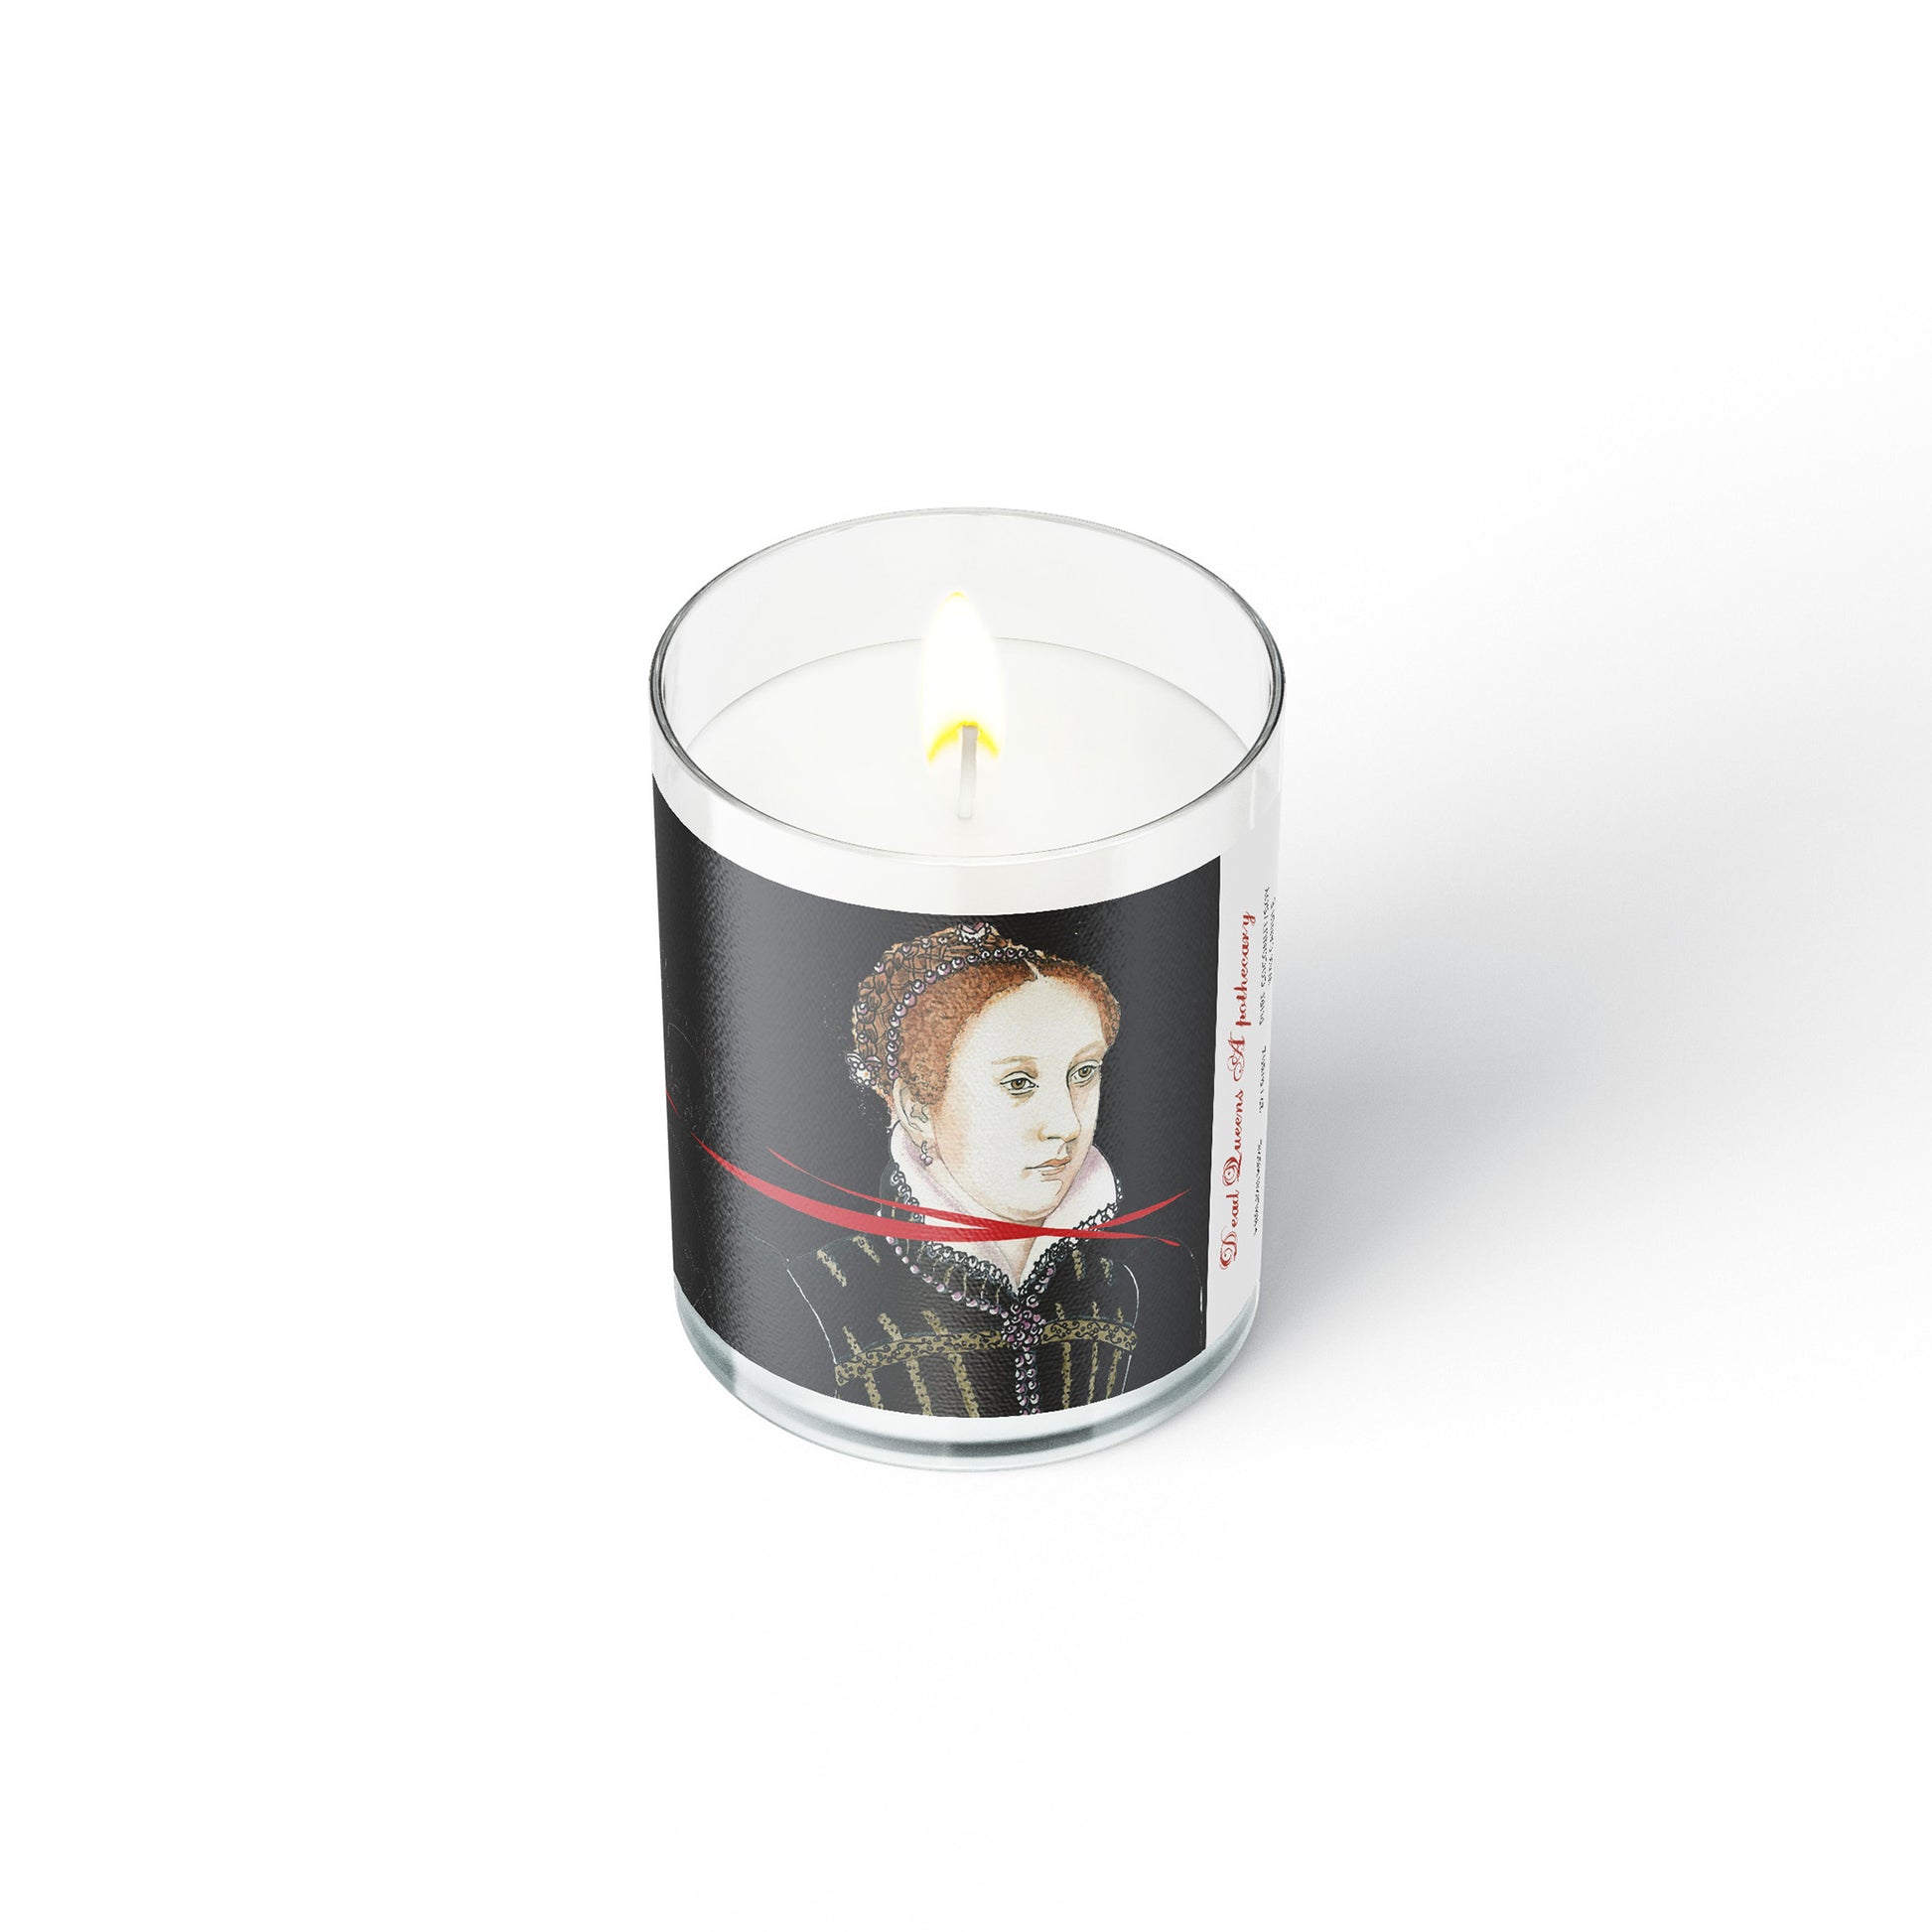 Mary Queen of Scots English Rose Candle Lit - Dead Queens